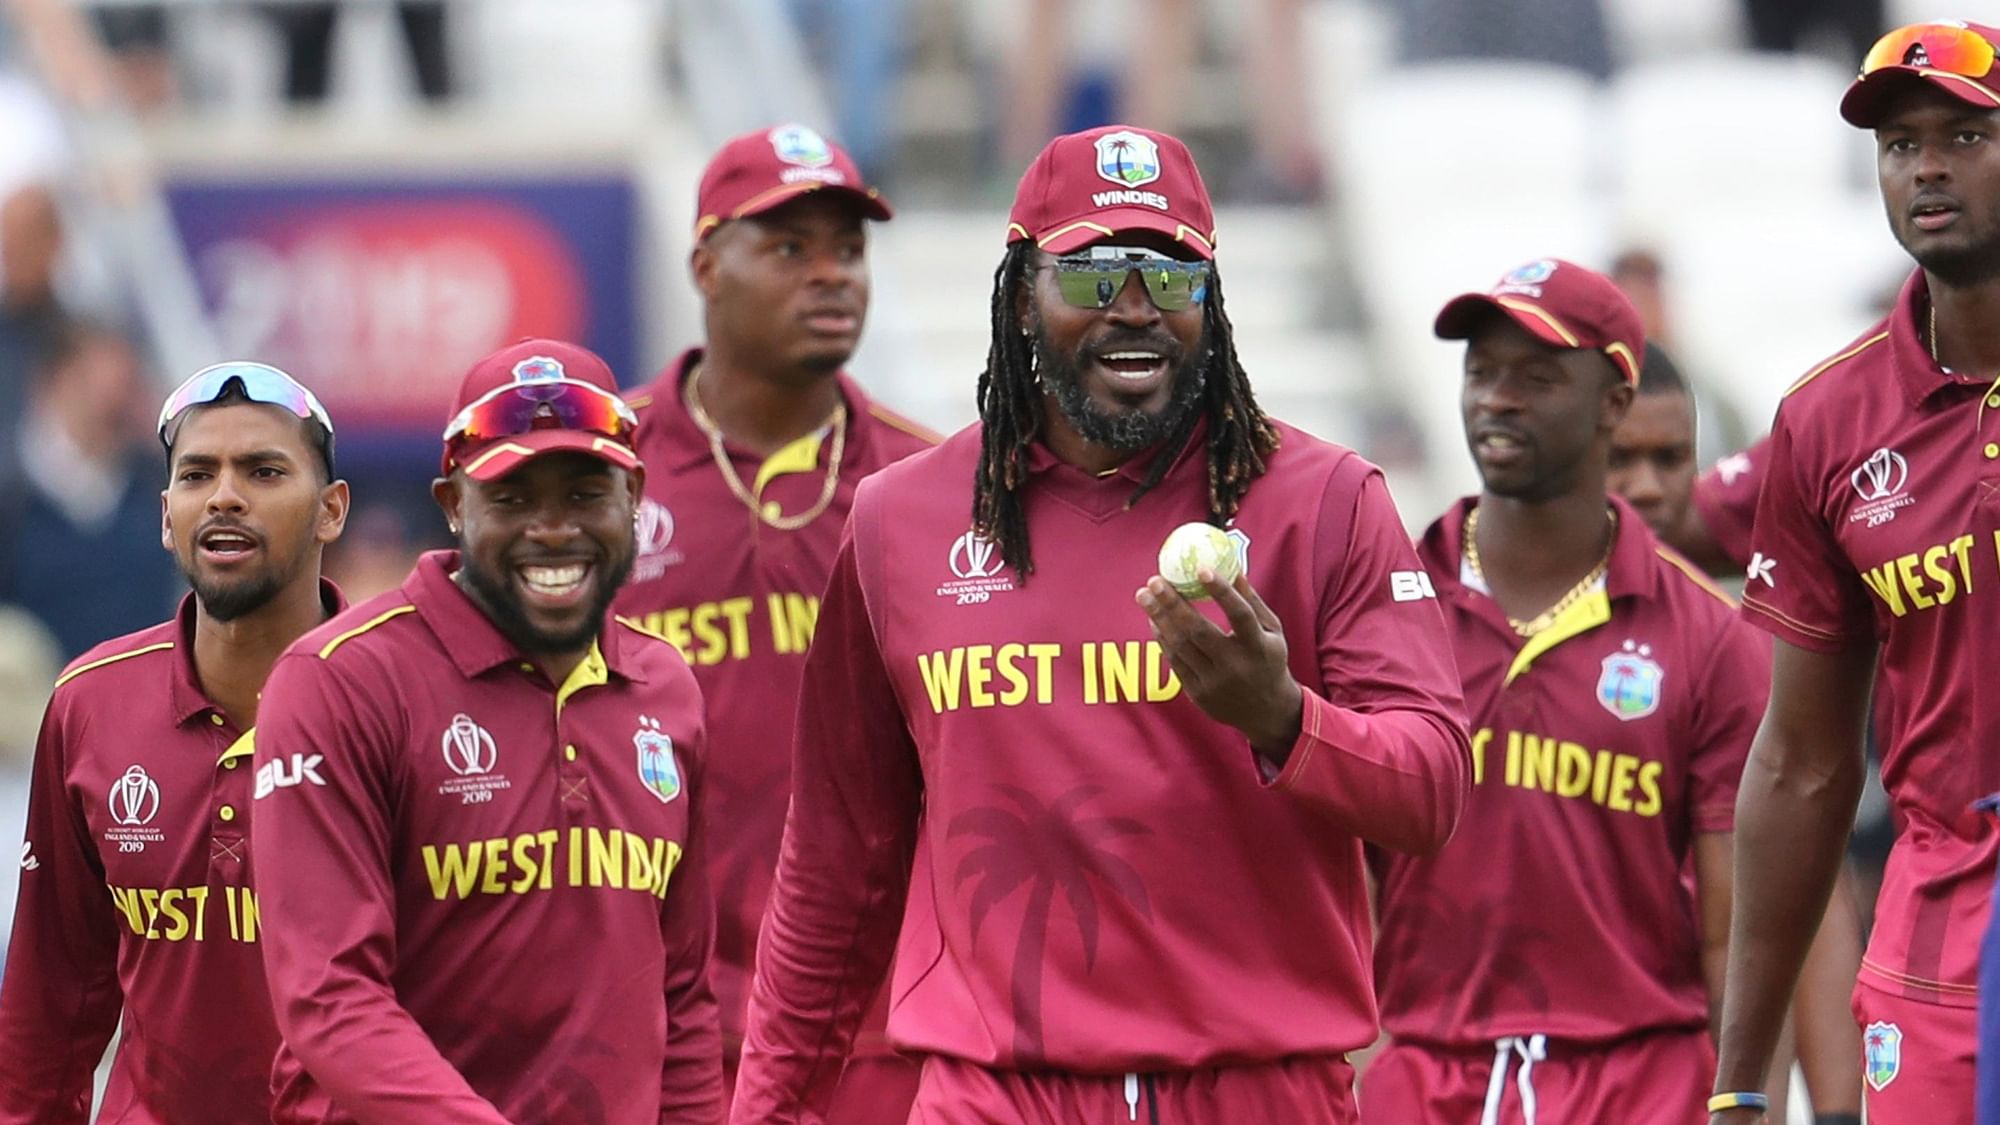 Chris Gayle leads the West Indies team off the field after helping them beat Afghanistan in their last match of the 2019 ICC World Cup.